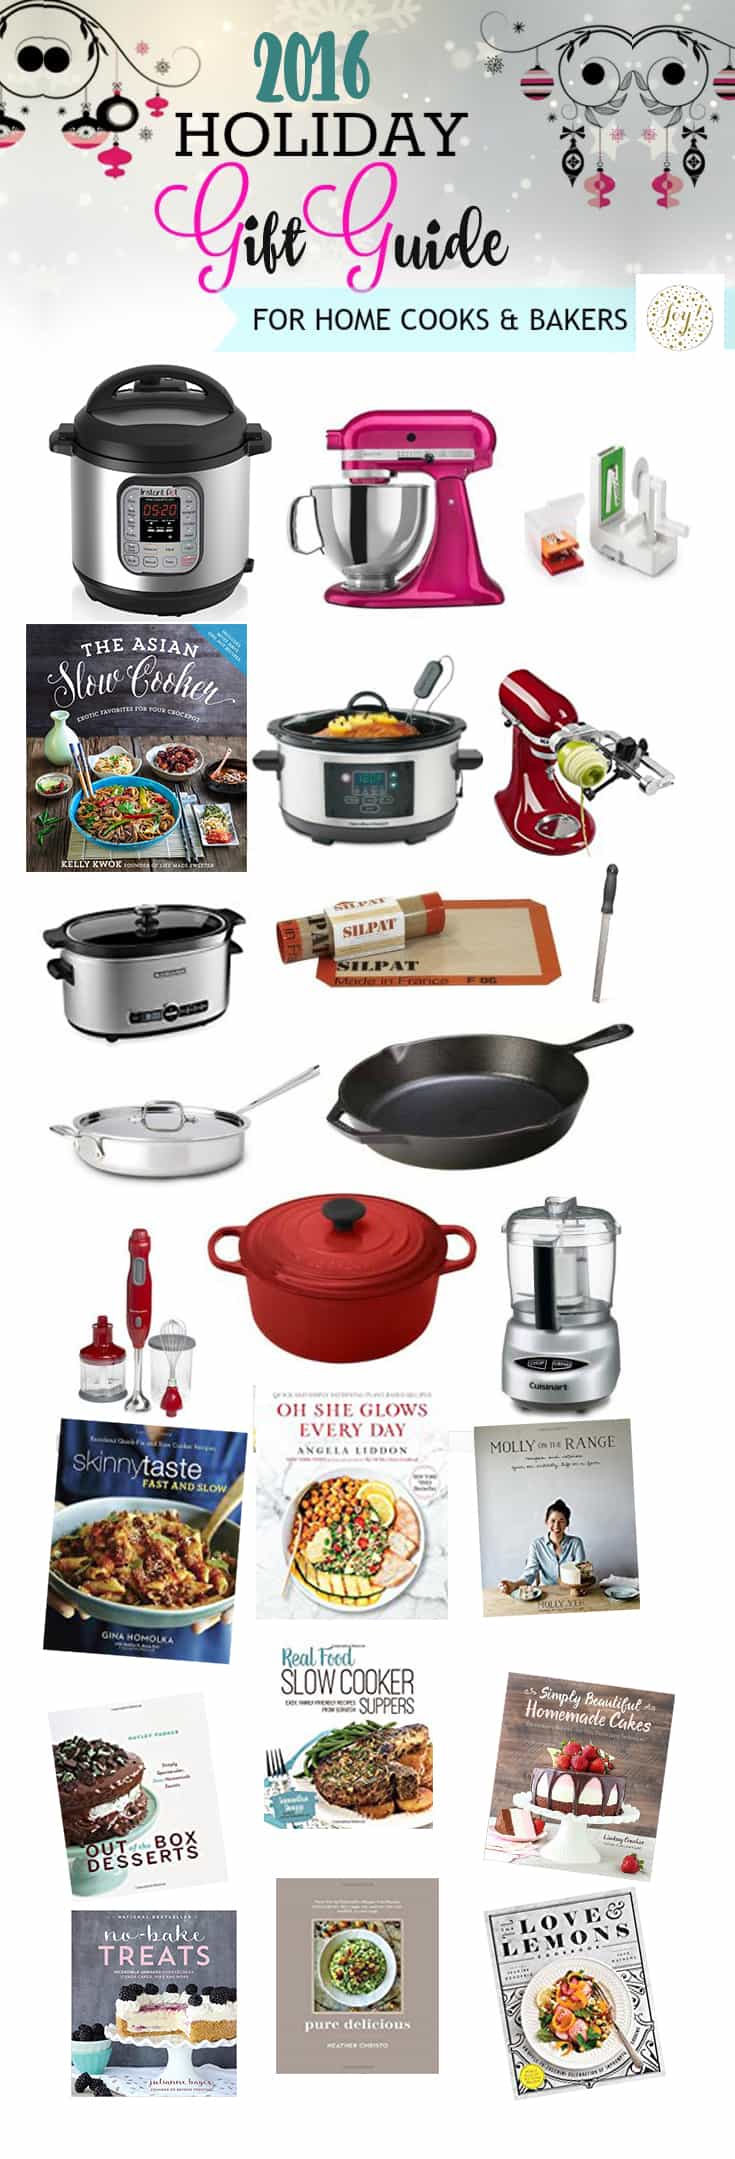 2016 Holiday Gift Guide with a collage of cooking-related products